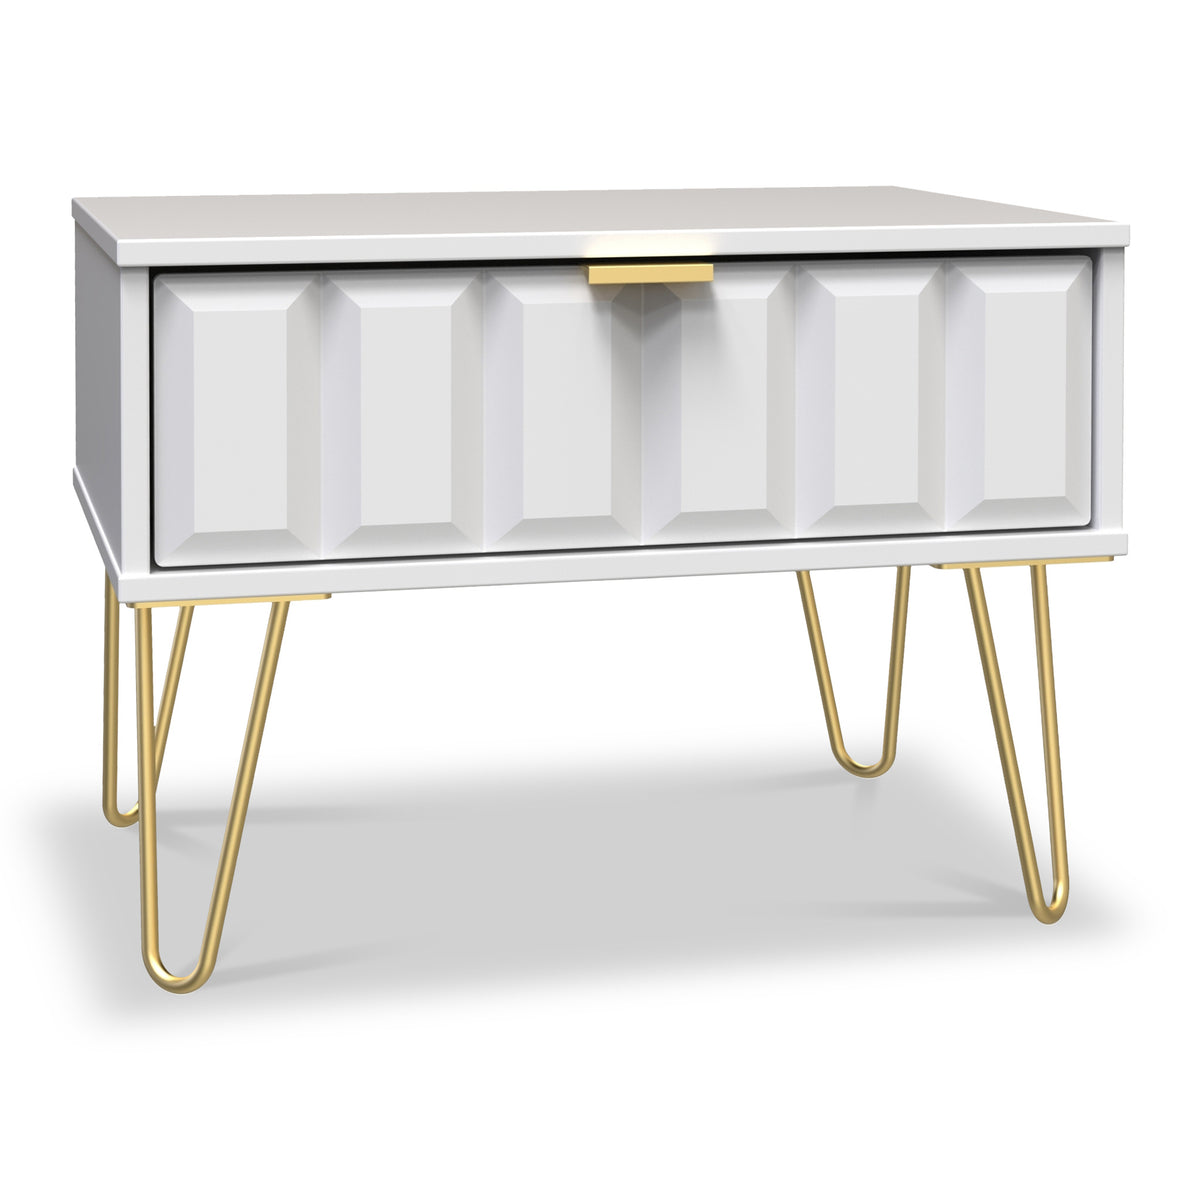 Harlow White Drawer Side Table with Gold Hairpin Legs from Roseland